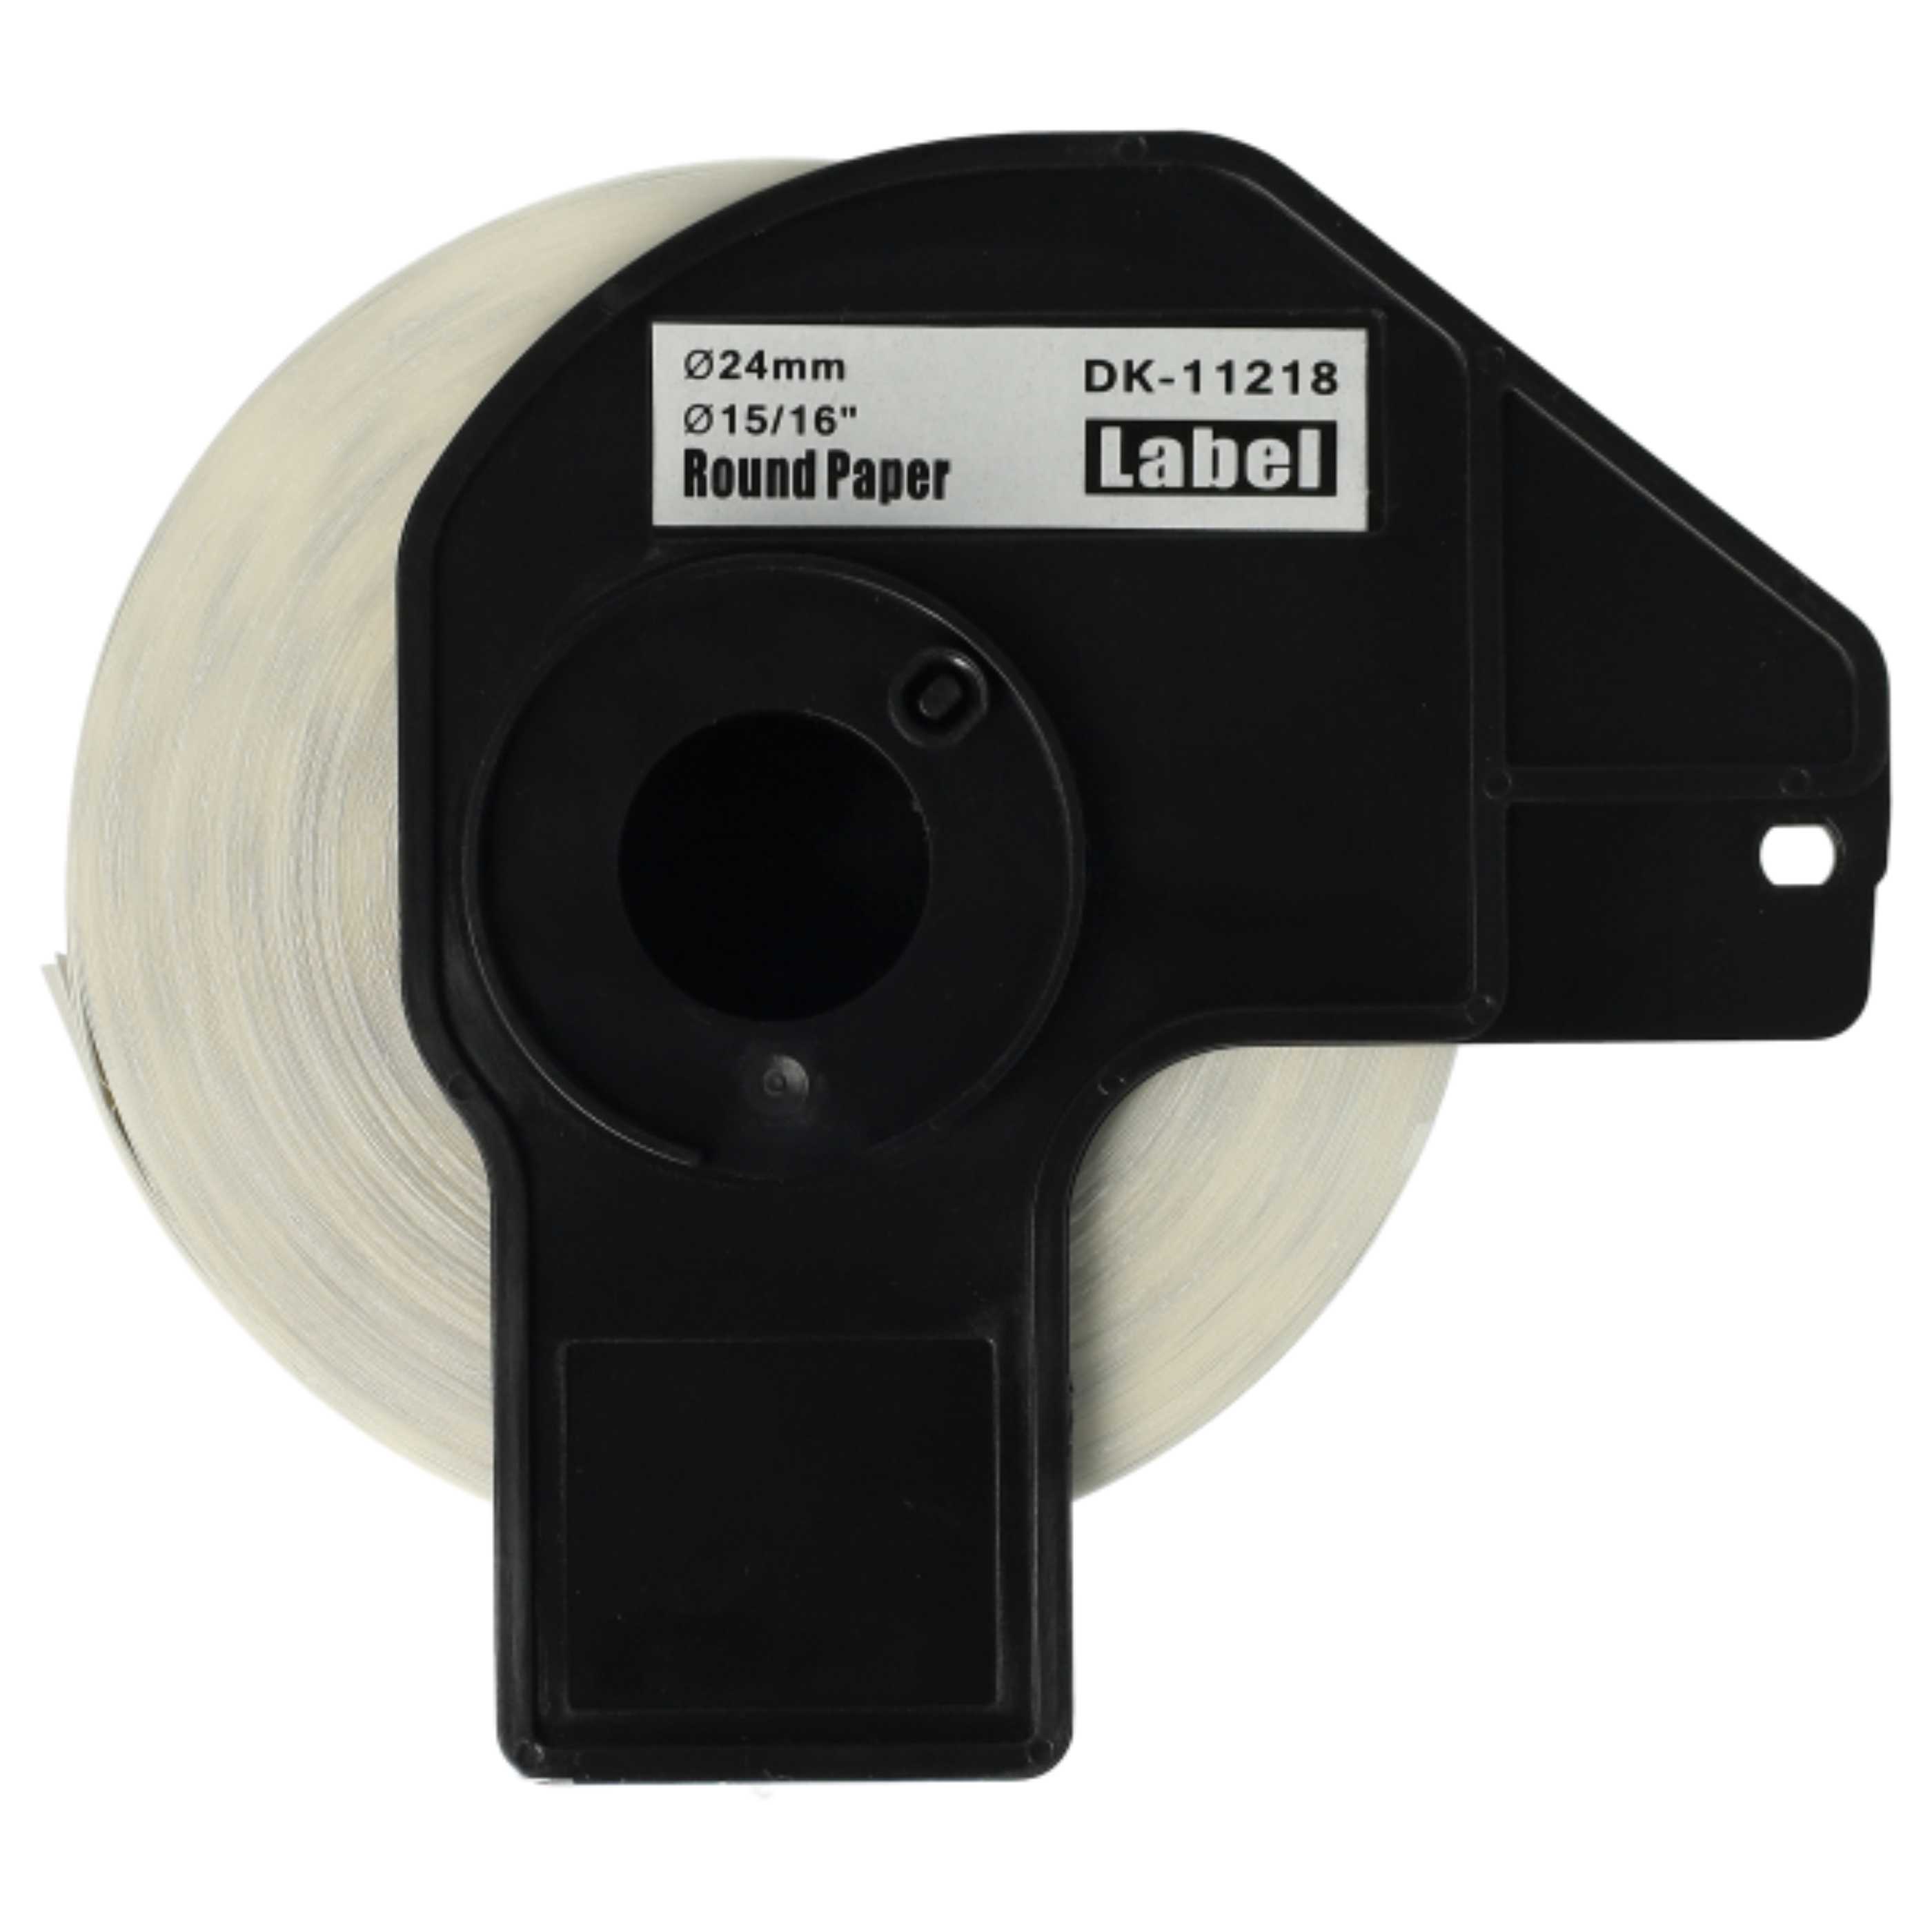 3x Labels replaces Brother DK-11218 for Labeller - Premium 24 mm + Holder